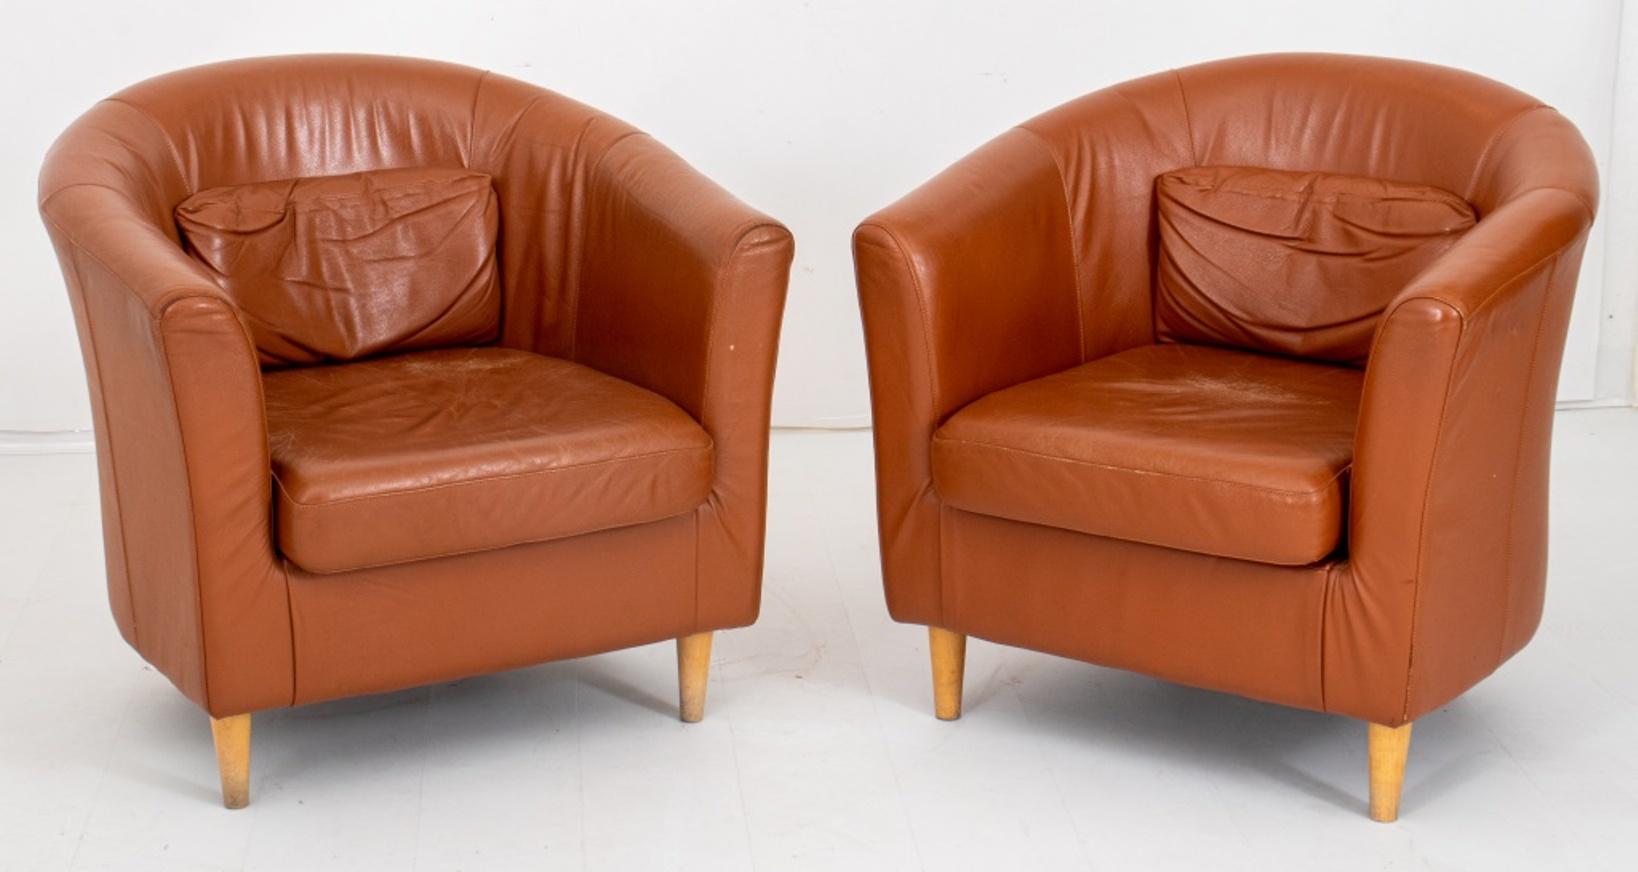 Pair of Scandinavian club chairs, 2, with leather upholstery (worn), with curved back and arms above a drop in cushion on four tapering columnar legs.

Dimensions: 29